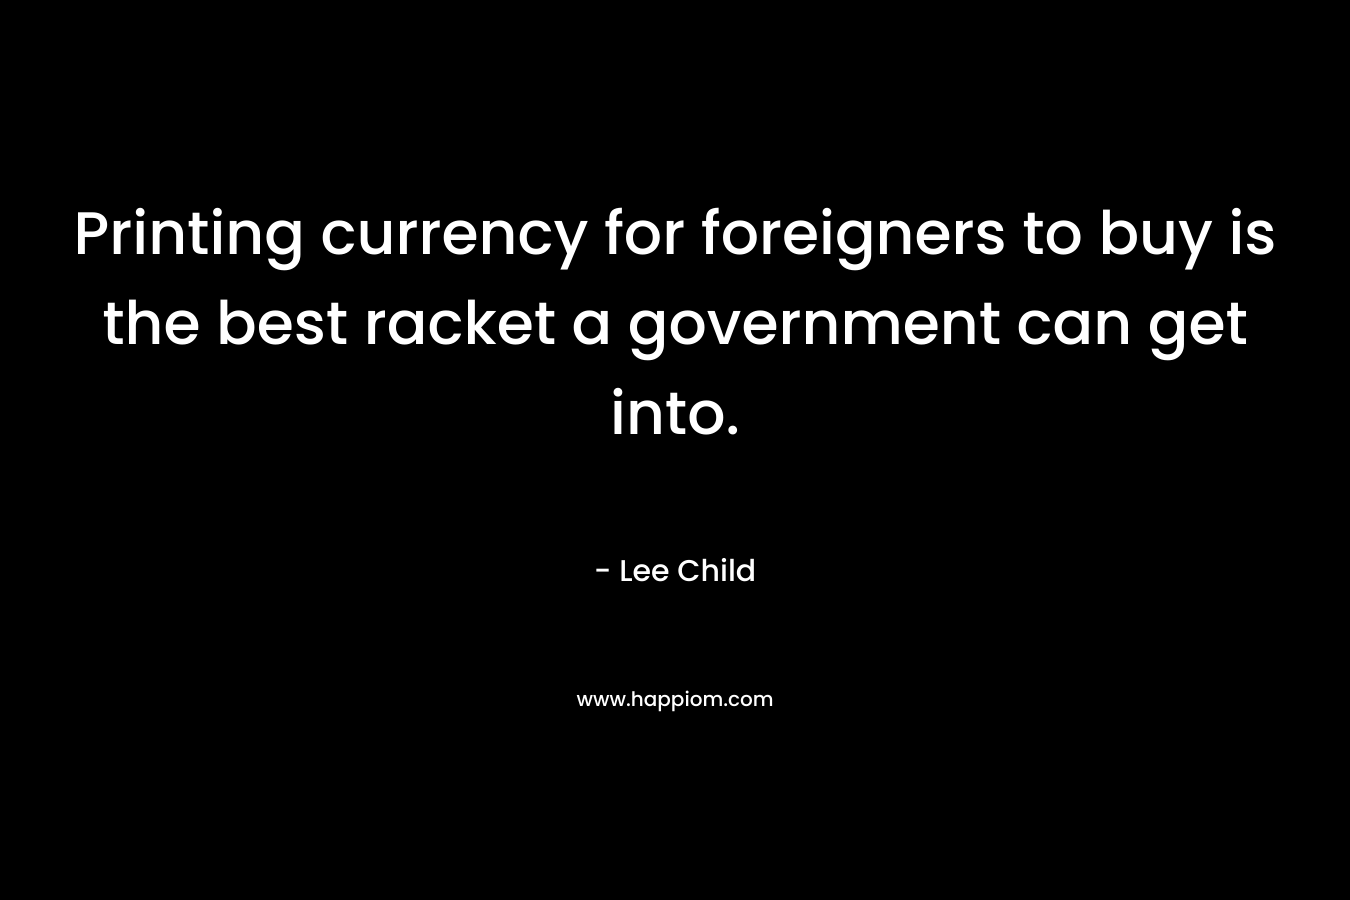 Printing currency for foreigners to buy is the best racket a government can get into. – Lee Child